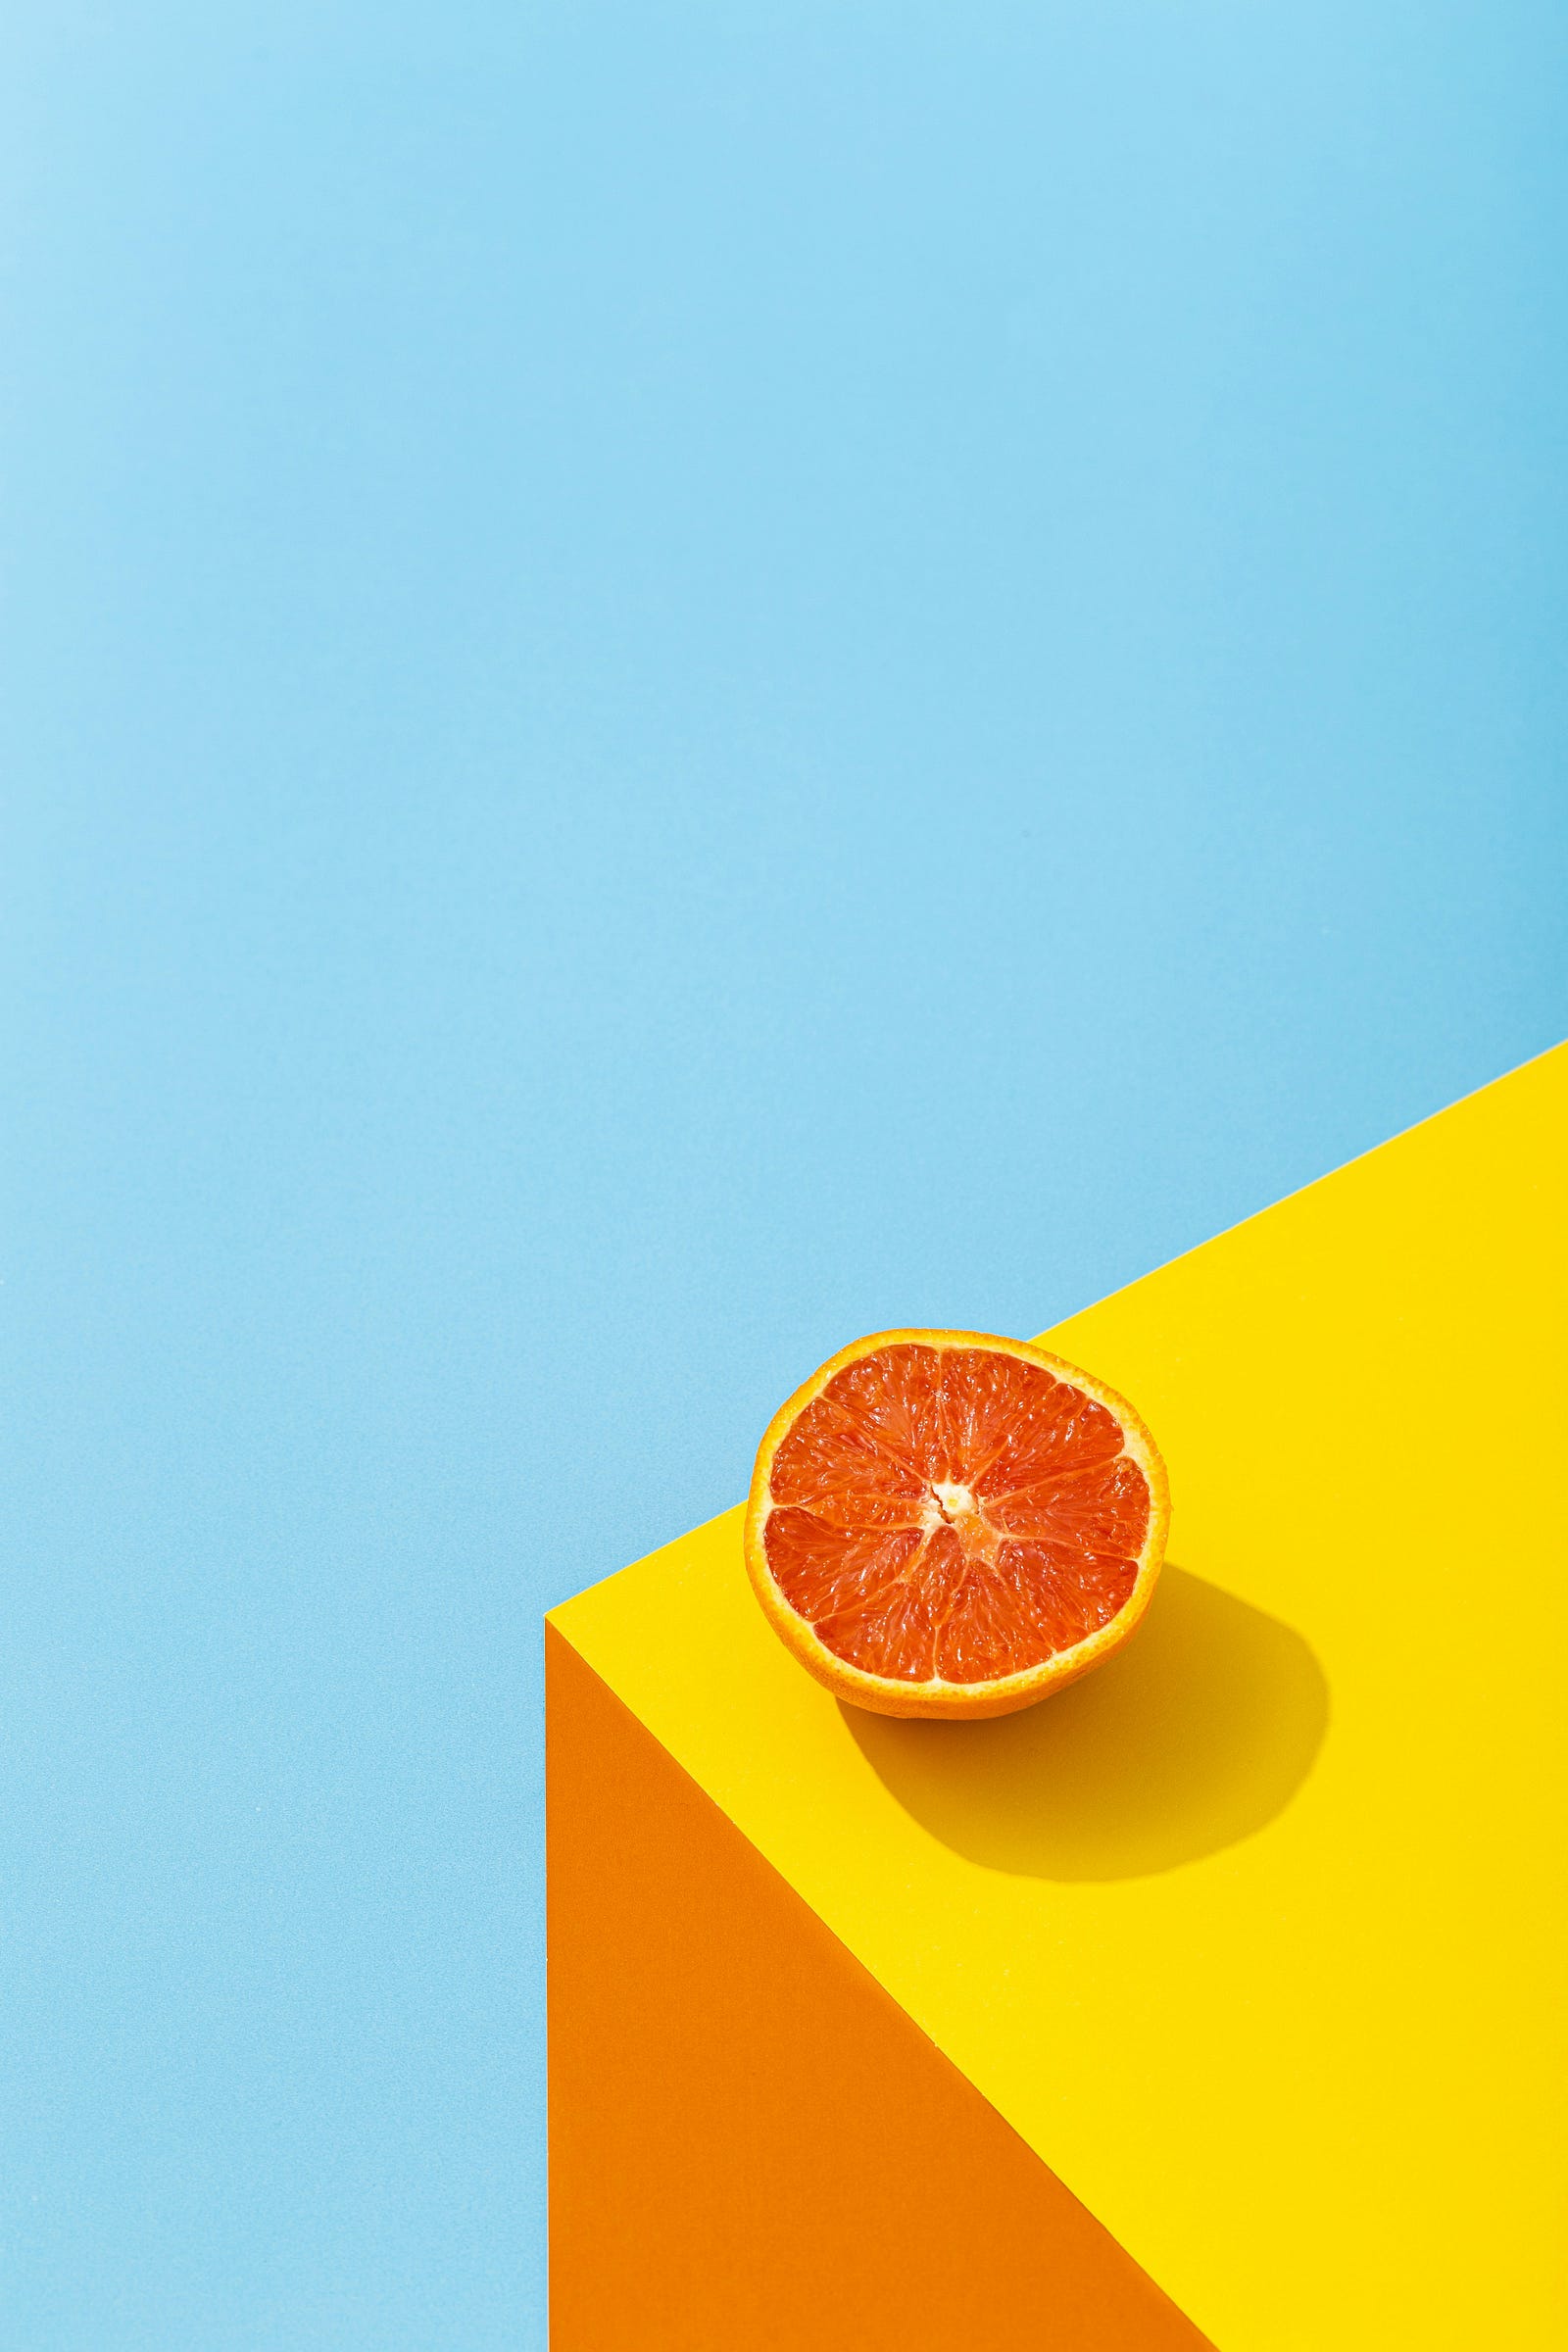 A colorful drawing of an orange perched on the edge of a bright yellow table.